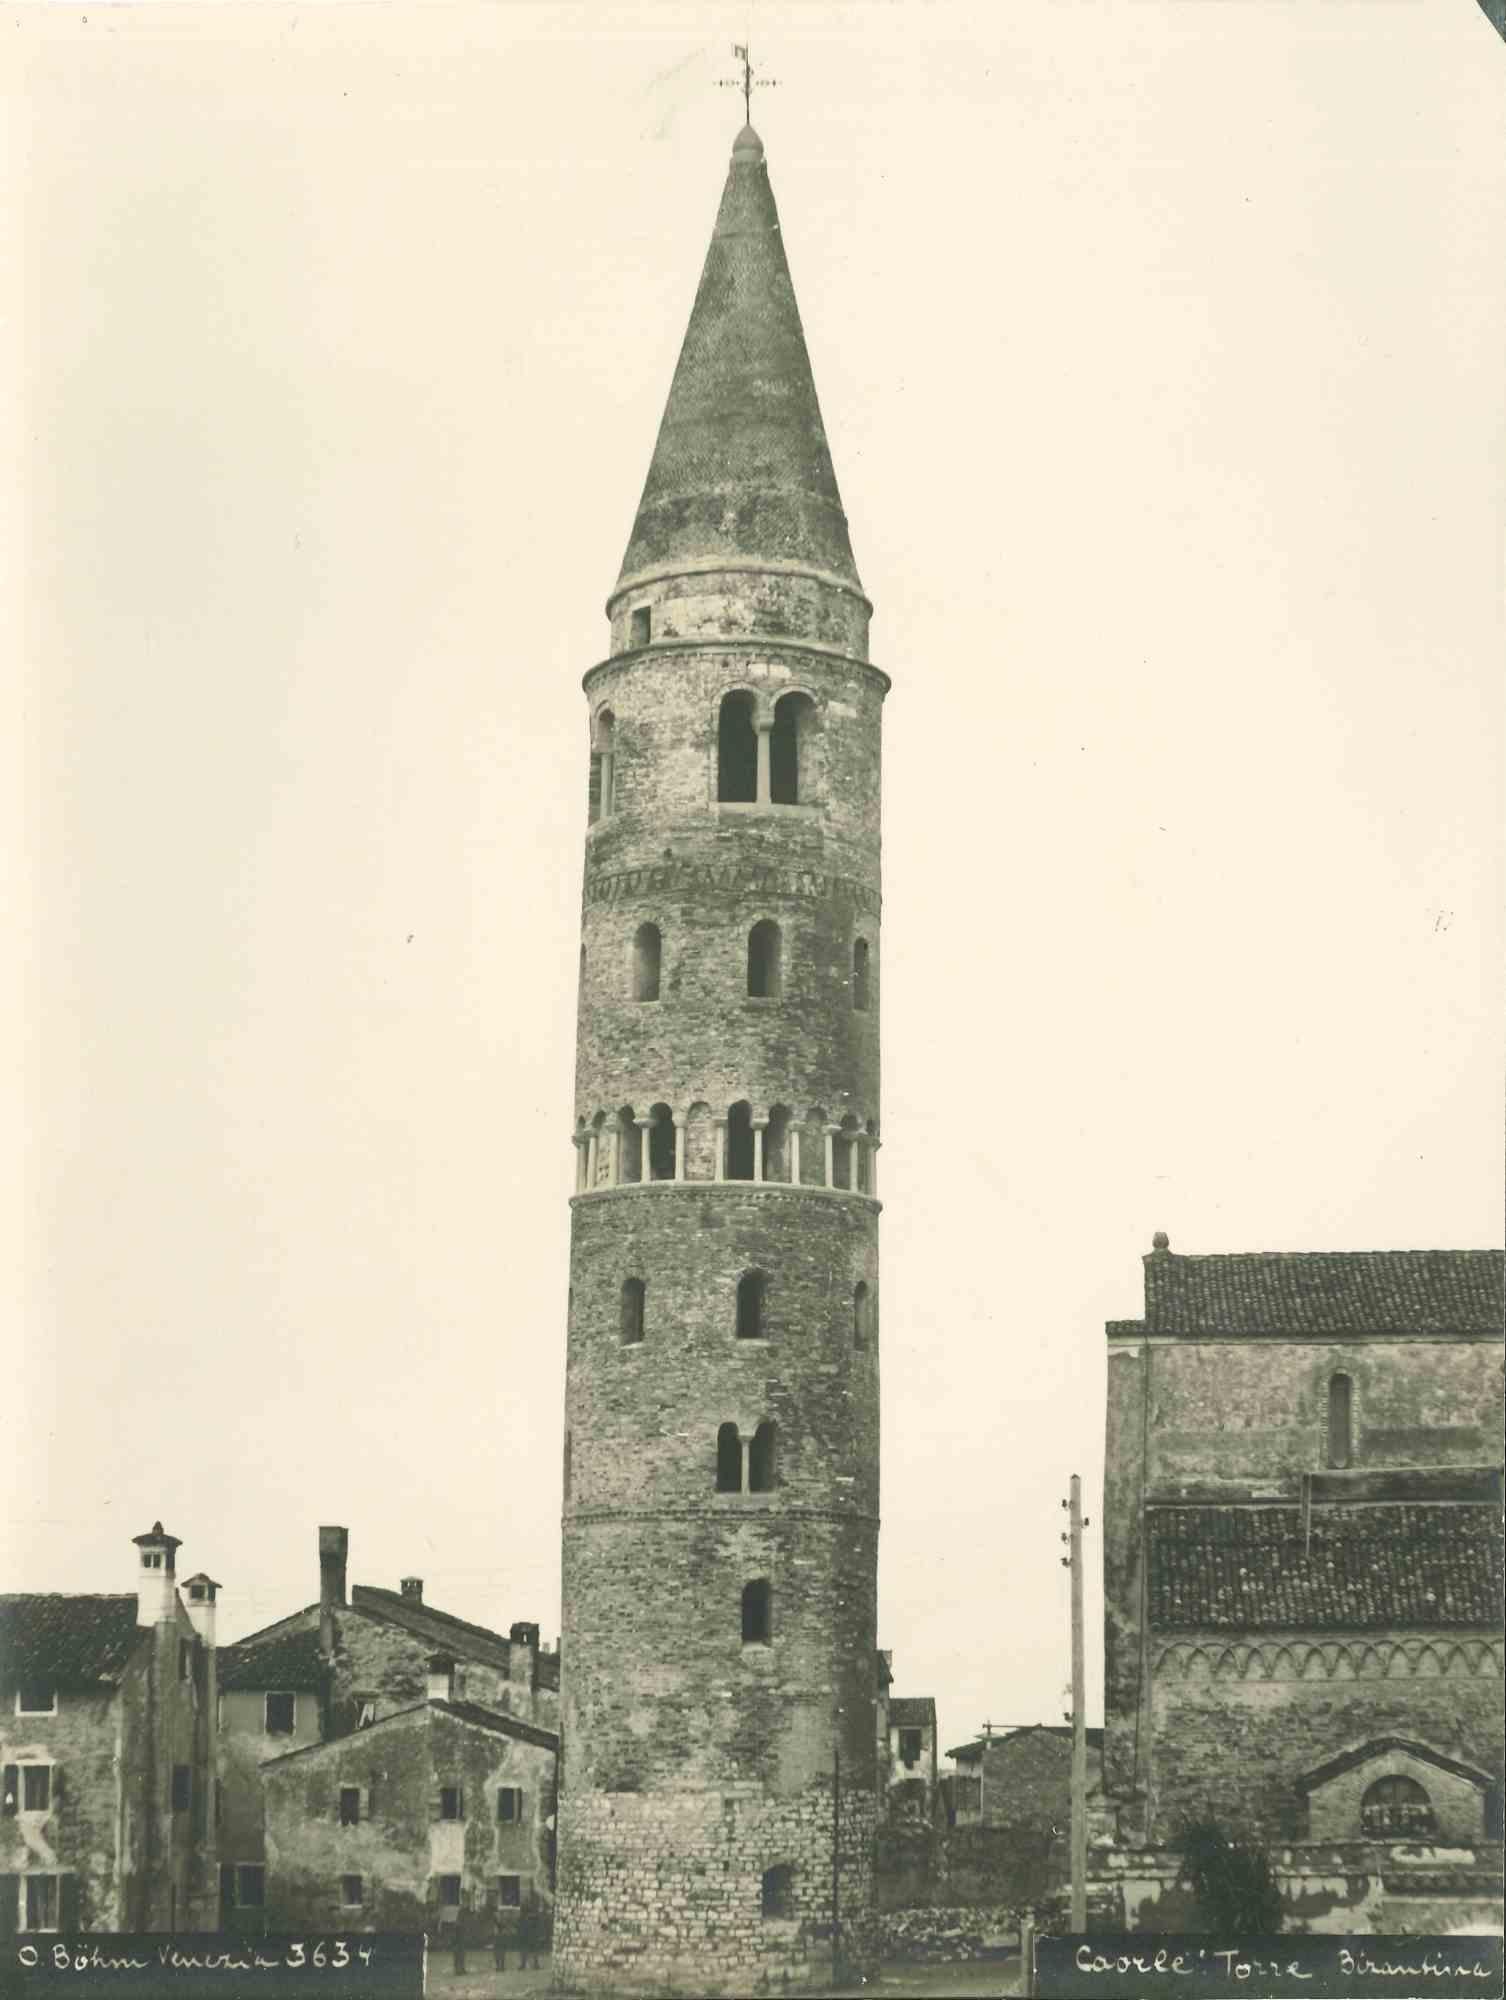 Byzantine Tower - Vintage Photograph - Early 20th Century